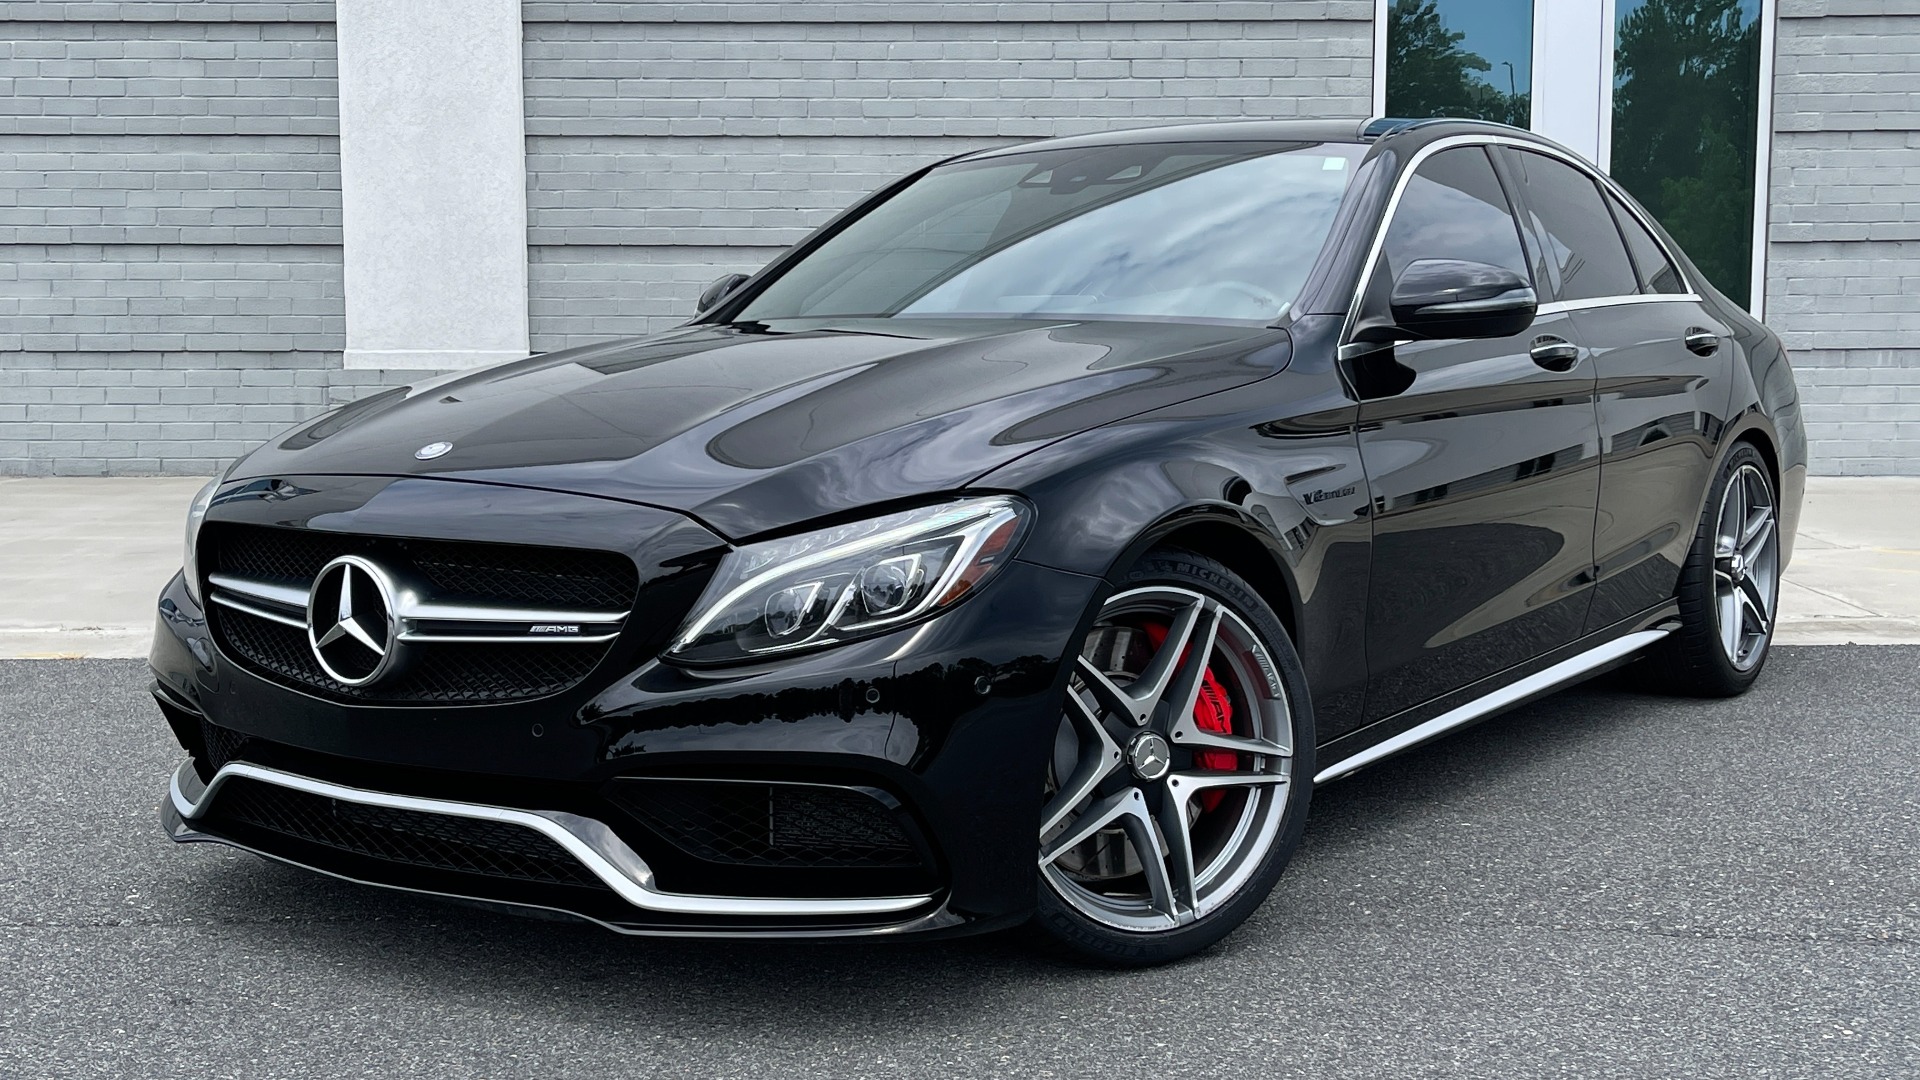 Used 2016 Mercedes-Benz C-CLASS AMG C 63 S SEDAN / NAV / BURMESTER / PANO-ROOF / CAMERA for sale $58,000 at Formula Imports in Charlotte NC 28227 1